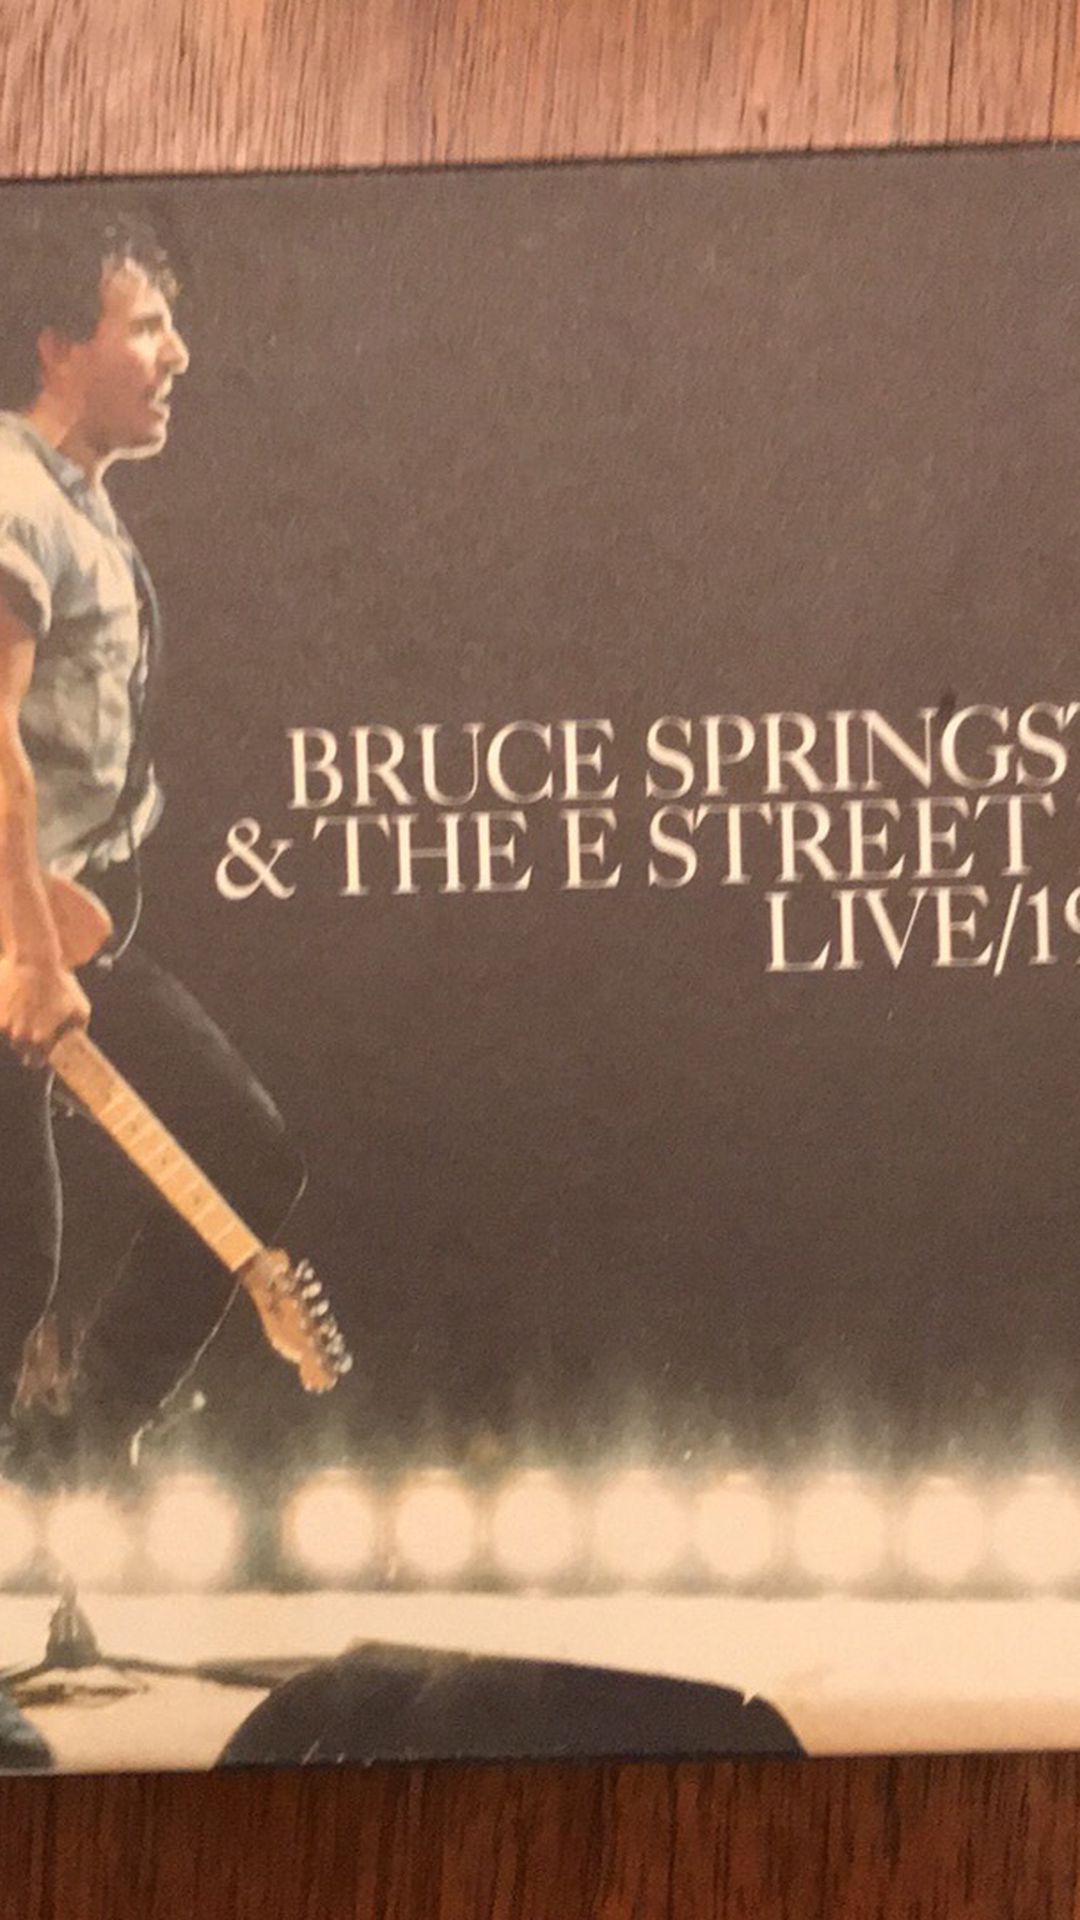 Bruce Springsteen & The E Street Band: Live/1975-85